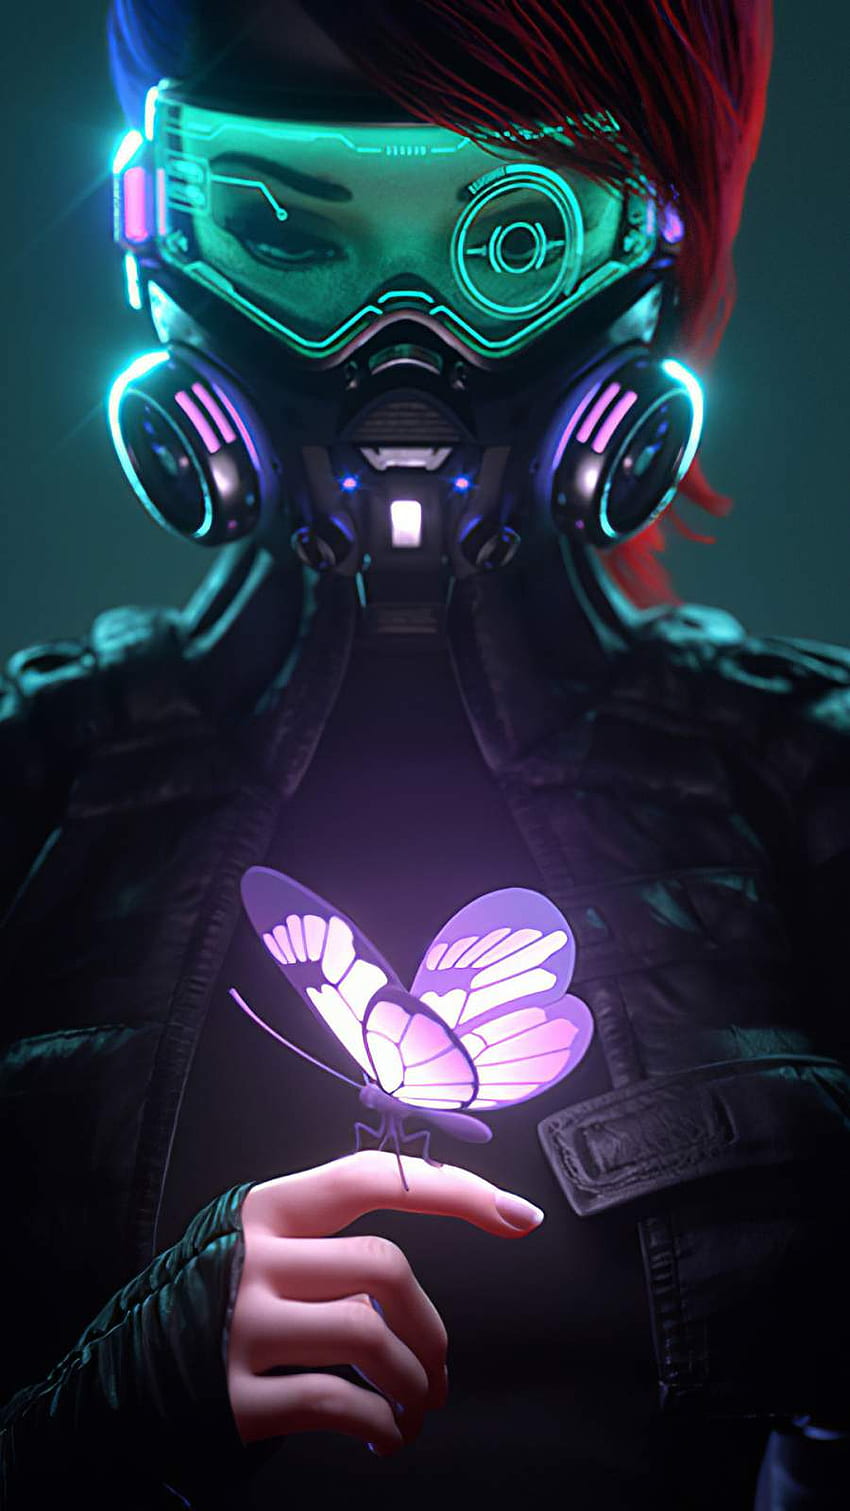 Cyberpunk Girl In A Gas Mask Looking At The Glowing Butterfly IPhone - IPhone : iPhone HD phone wallpaper